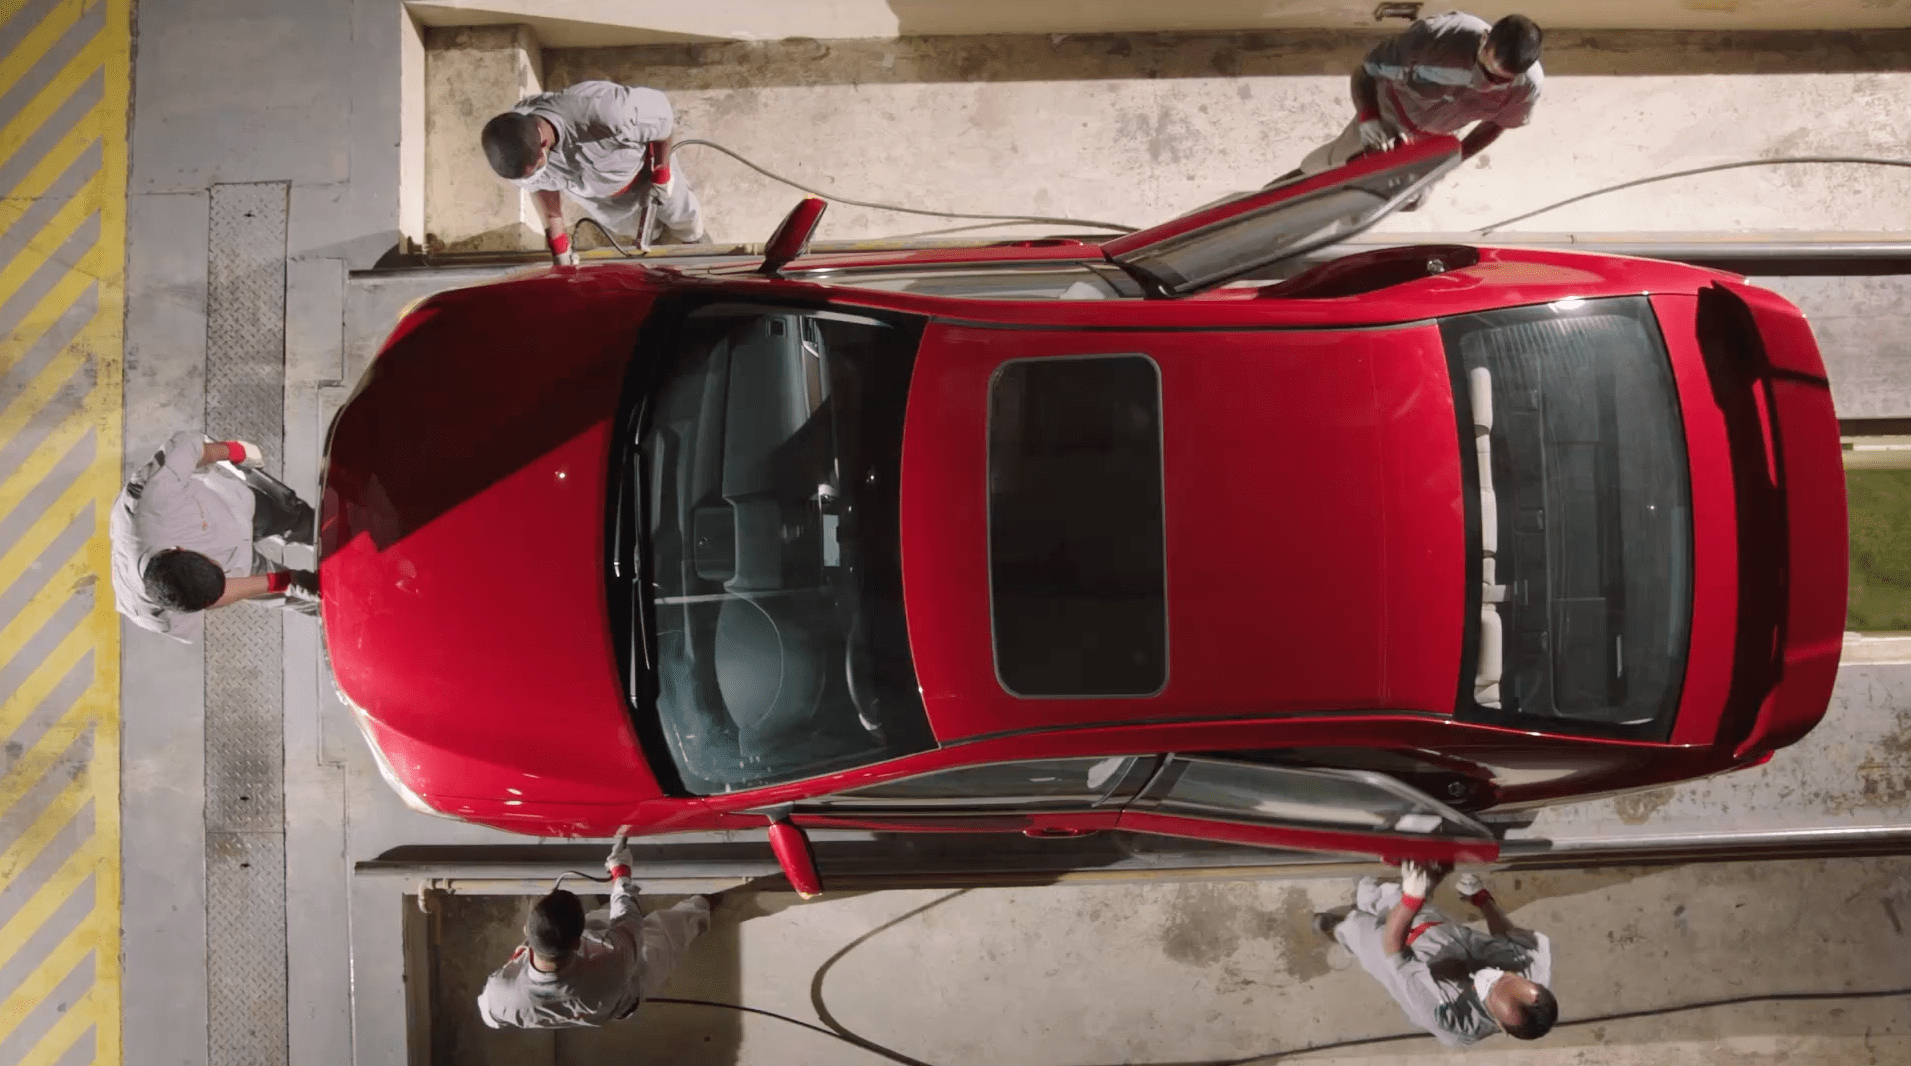 Top view of a red car servicing by 4 employees of Saud Bahwan